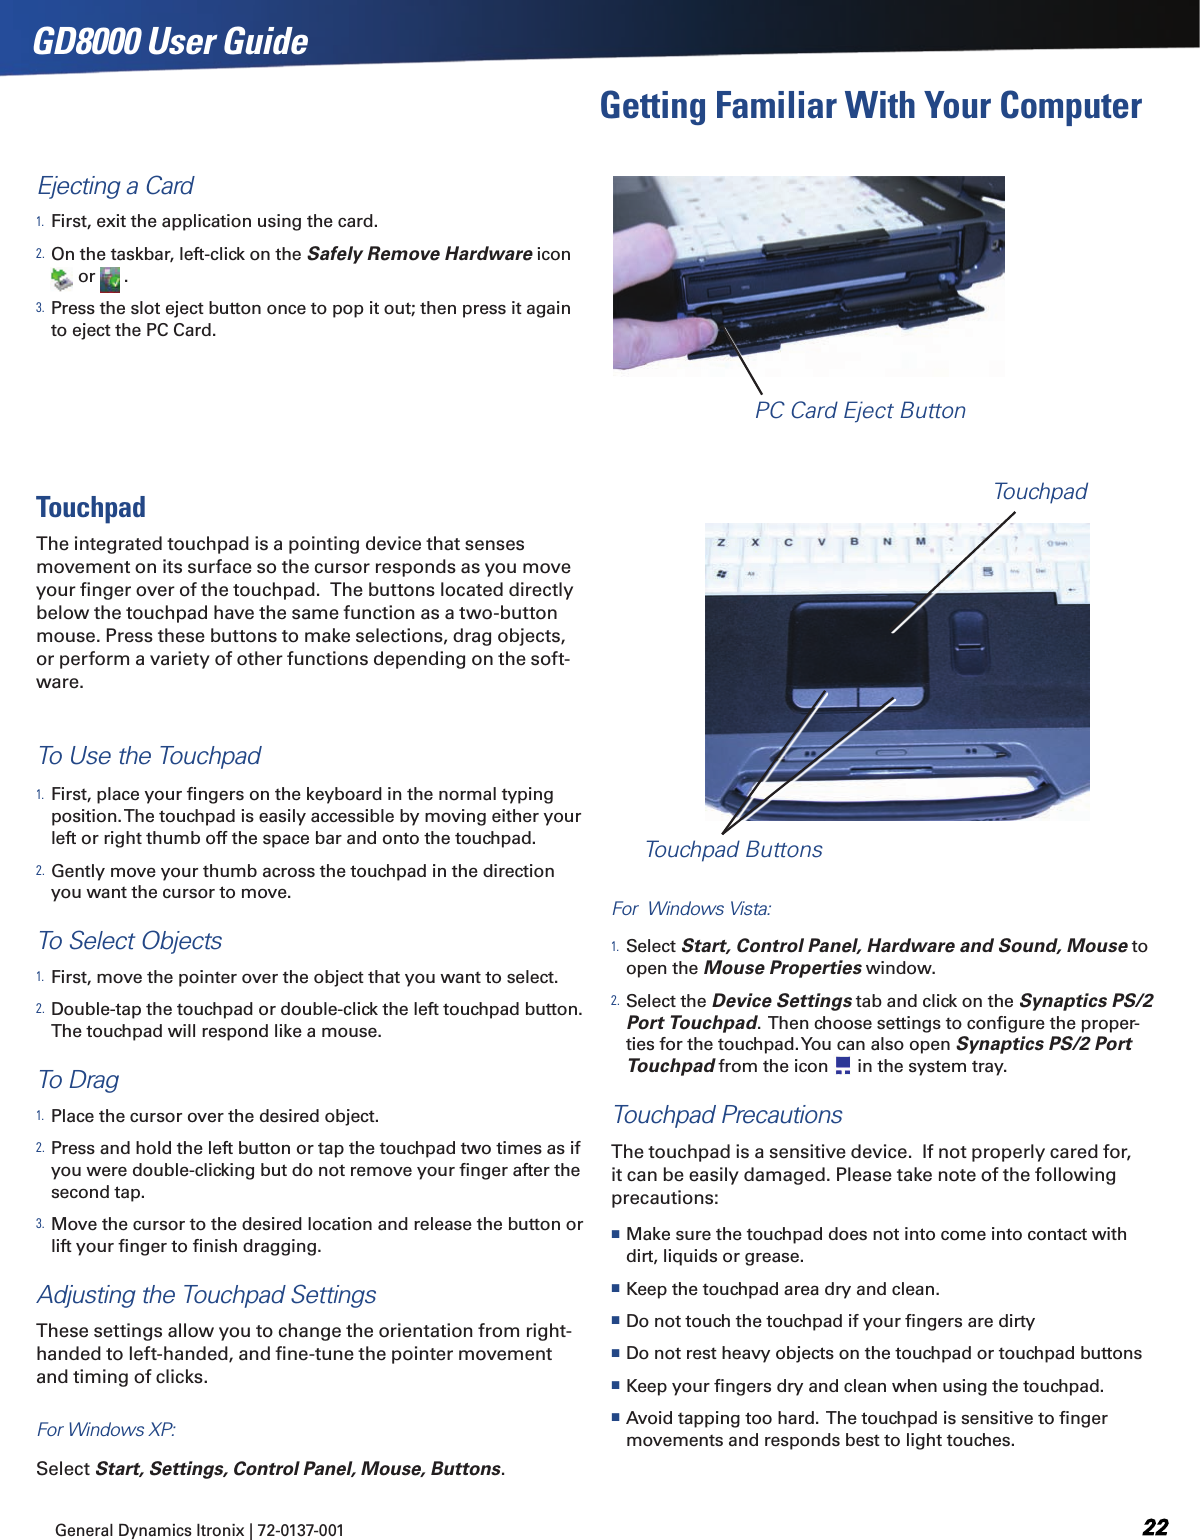 General Dynamics Itronix | 72-0137-001  GD8000 User GuideEjecting a Card1. First, exit the application using the card.2. On the taskbar, left-click on the Safely Remove Hardware icon   or   .3. Press the slot eject button once to pop it out; then press it again to eject the PC Card.Getting Familiar With Your ComputerPC Card Eject ButtonTouchpadThe integrated touchpad is a pointing device that senses movement on its surface so the cursor responds as you move your ﬁnger over of the touchpad.  The buttons located directly below the touchpad have the same function as a two-button mouse. Press these buttons to make selections, drag objects, or perform a variety of other functions depending on the soft-ware.  To Use the Touchpad1. First, place your ﬁngers on the keyboard in the normal typing position. The touchpad is easily accessible by moving either your left or right thumb off the space bar and onto the touchpad.2. Gently move your thumb across the touchpad in the direction you want the cursor to move.To Select Objects1. First, move the pointer over the object that you want to select.2. Double-tap the touchpad or double-click the left touchpad button.  The touchpad will respond like a mouse.To Drag1. Place the cursor over the desired object.2. Press and hold the left button or tap the touchpad two times as if you were double-clicking but do not remove your ﬁnger after the second tap.3. Move the cursor to the desired location and release the button or lift your ﬁnger to ﬁnish dragging.Adjusting the Touchpad SettingsThese settings allow you to change the orientation from right-handed to left-handed, and ﬁne-tune the pointer movement and timing of clicks.For Windows XP:  Select Start, Settings, Control Panel, Mouse, Buttons.For  Windows Vista:  1. Select Start, Control Panel, Hardware and Sound, Mouse to open the Mouse Properties window.  2. Select the Device Settings tab and click on the Synaptics PS/2 Port Touchpad.  Then choose settings to conﬁgure the proper-ties for the touchpad. You can also open Synaptics PS/2 Port Touchpad from the icon   in the system tray.Touchpad PrecautionsThe touchpad is a sensitive device.  If not properly cared for, it can be easily damaged. Please take note of the following precautions: Make sure the touchpad does not into come into contact with dirt, liquids or grease.   Keep the touchpad area dry and clean. Do not touch the touchpad if your ﬁngers are dirty Do not rest heavy objects on the touchpad or touchpad buttons Keep your ﬁngers dry and clean when using the touchpad. Avoid tapping too hard.  The touchpad is sensitive to ﬁnger movements and responds best to light touches.TouchpadTouchpad Buttons